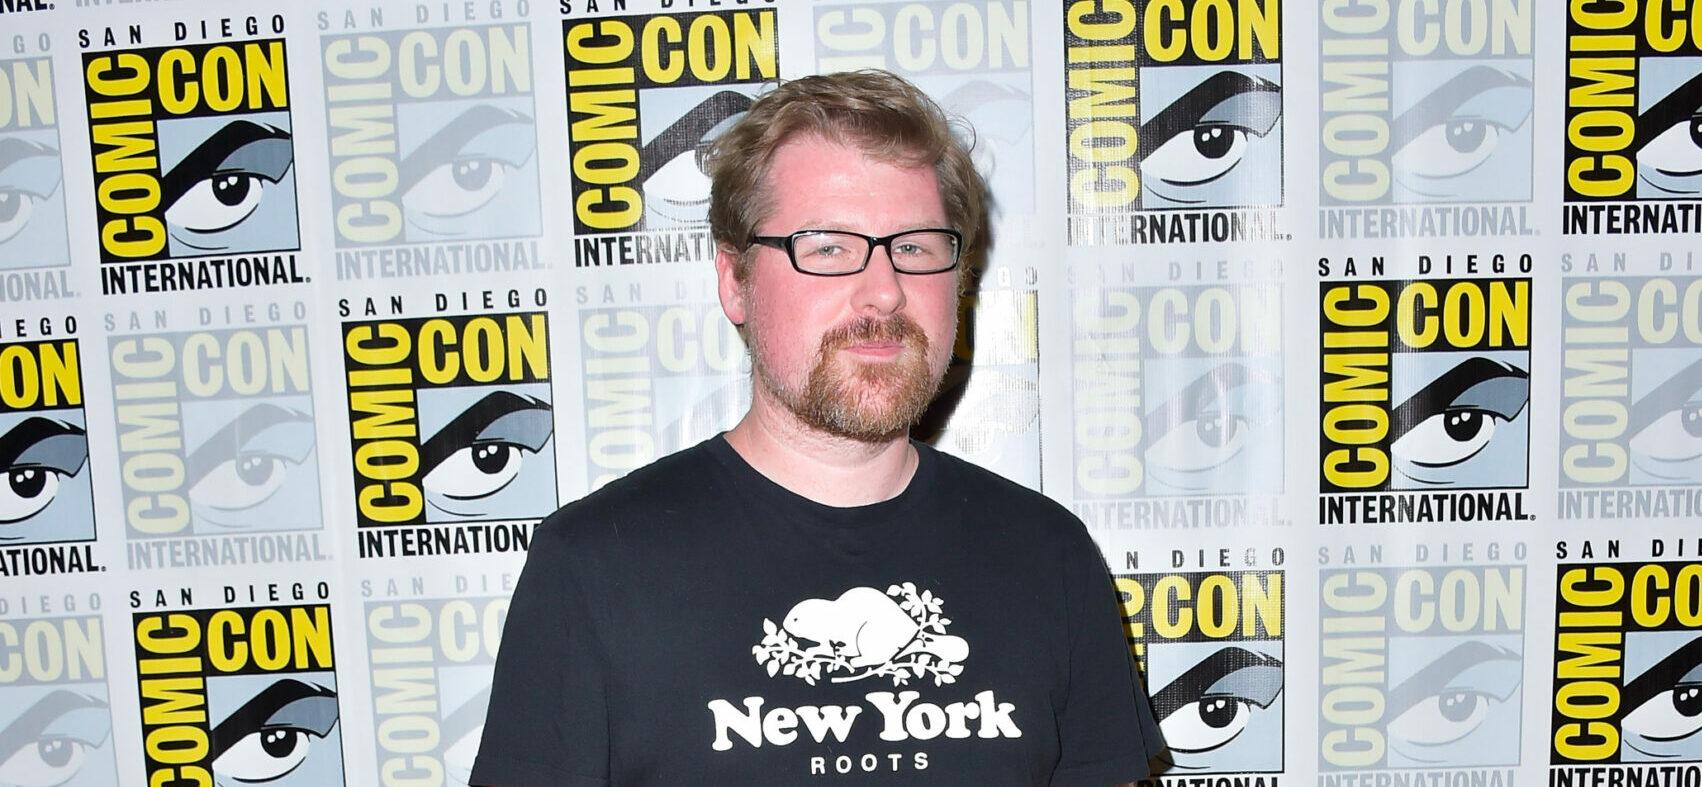 Justin Roiland Vindicated In Assault Accusations, Will He Get His Jobs Back?